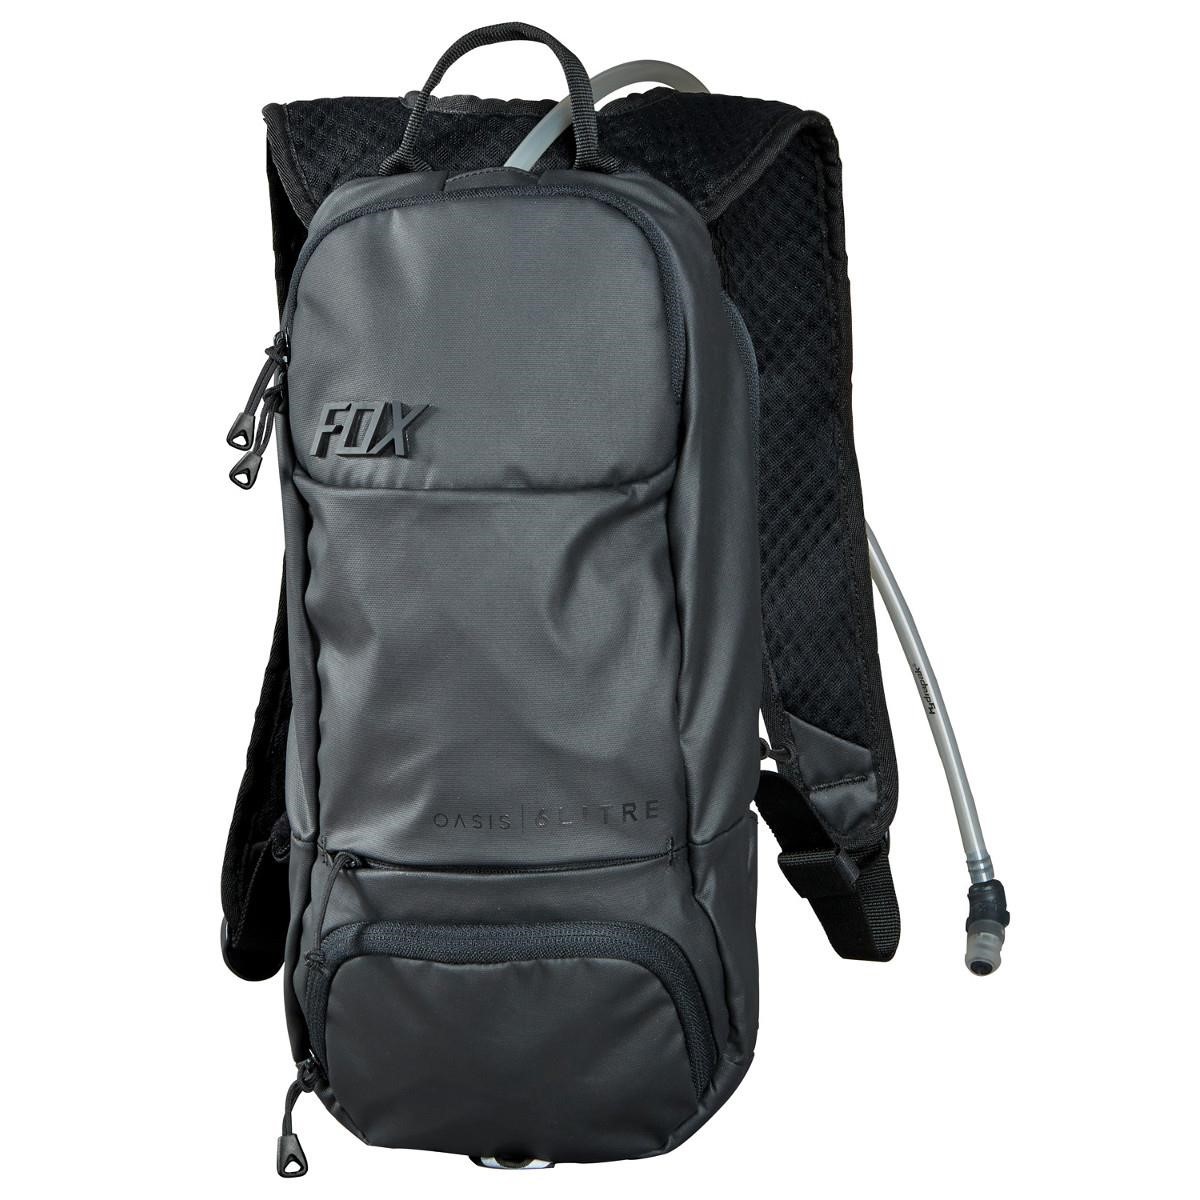 Fox Backpack with Hydration System Compartment Oasis Black